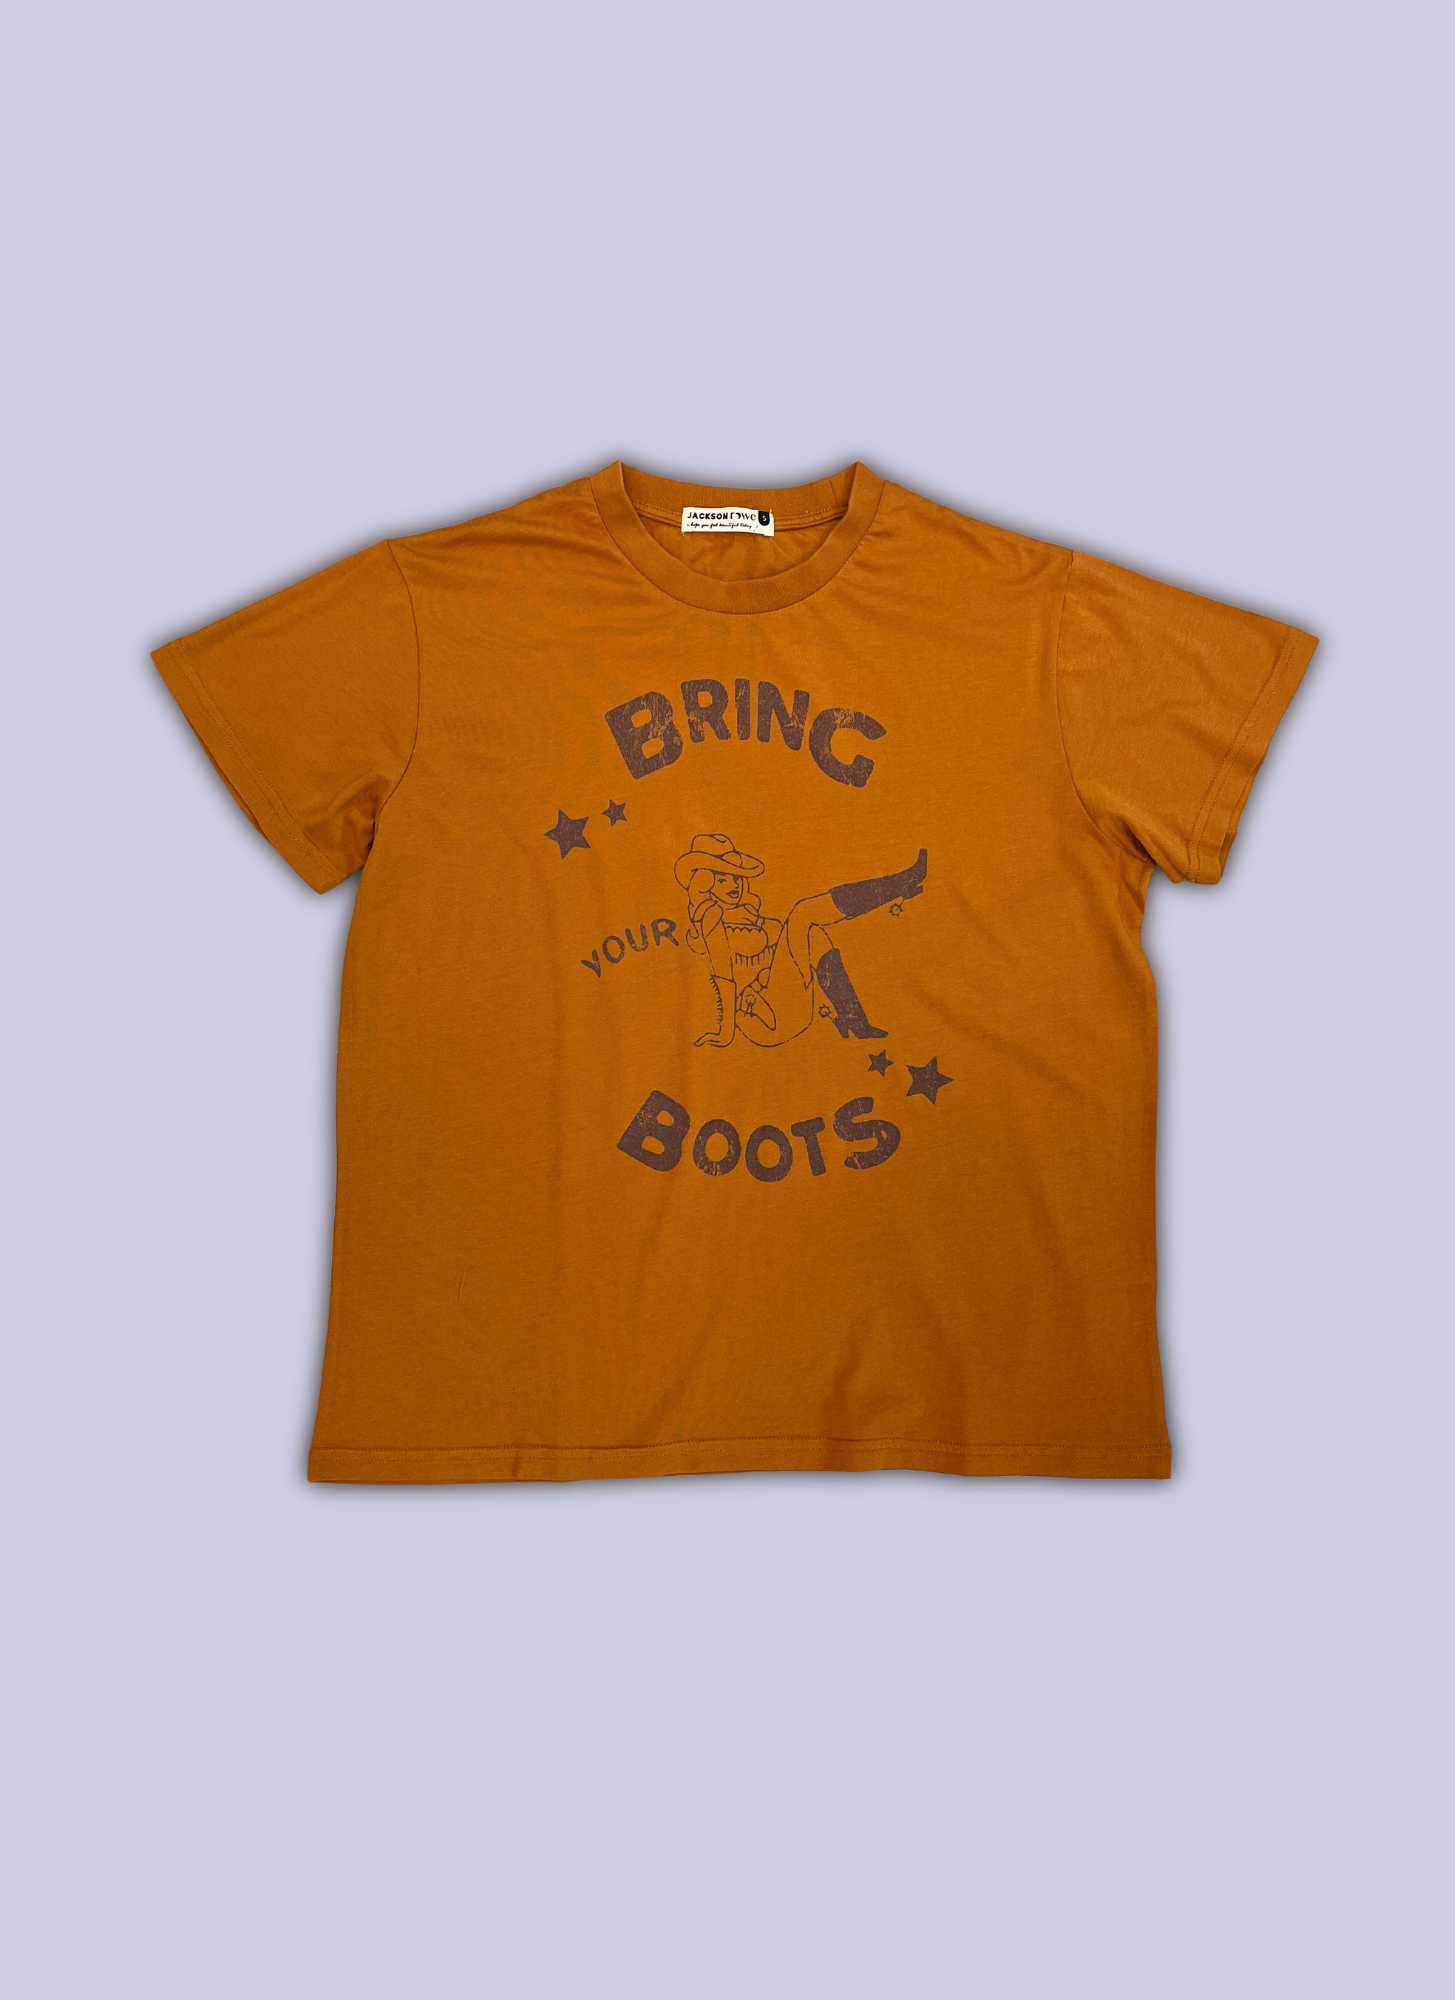 Bring Your Boots Band Tee